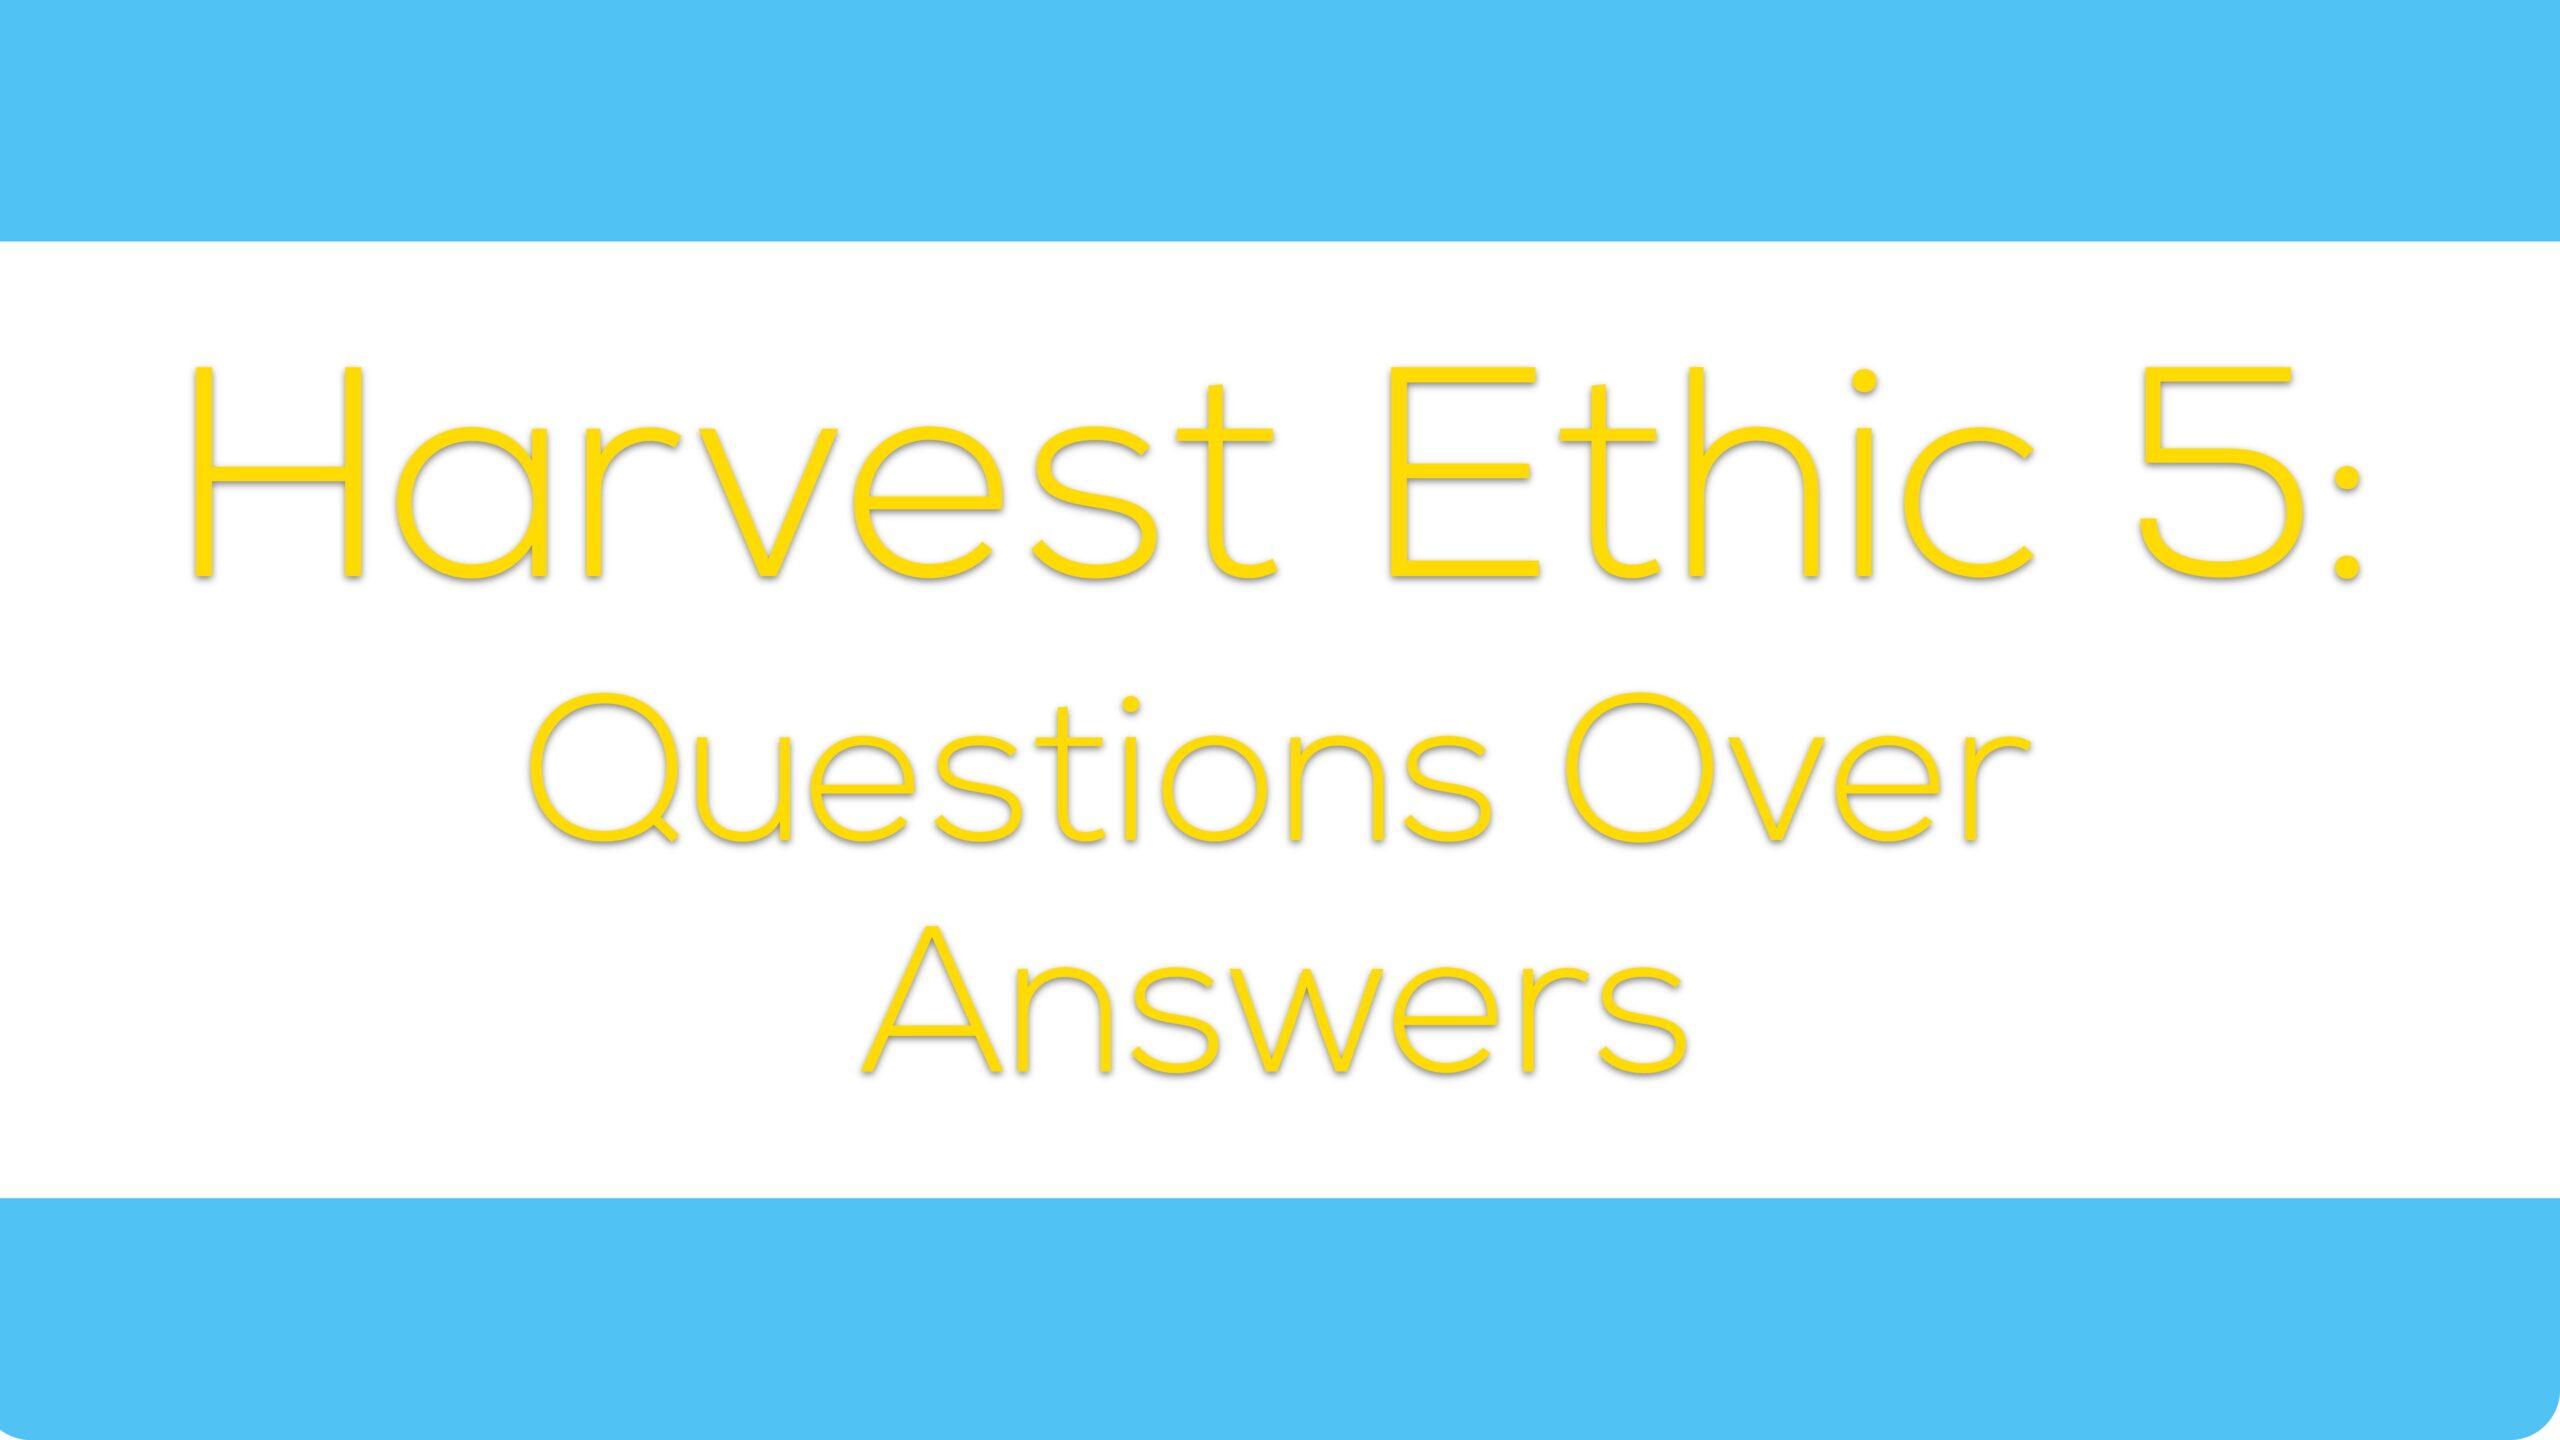 Harvest Ethic 5: Questions Over Answers